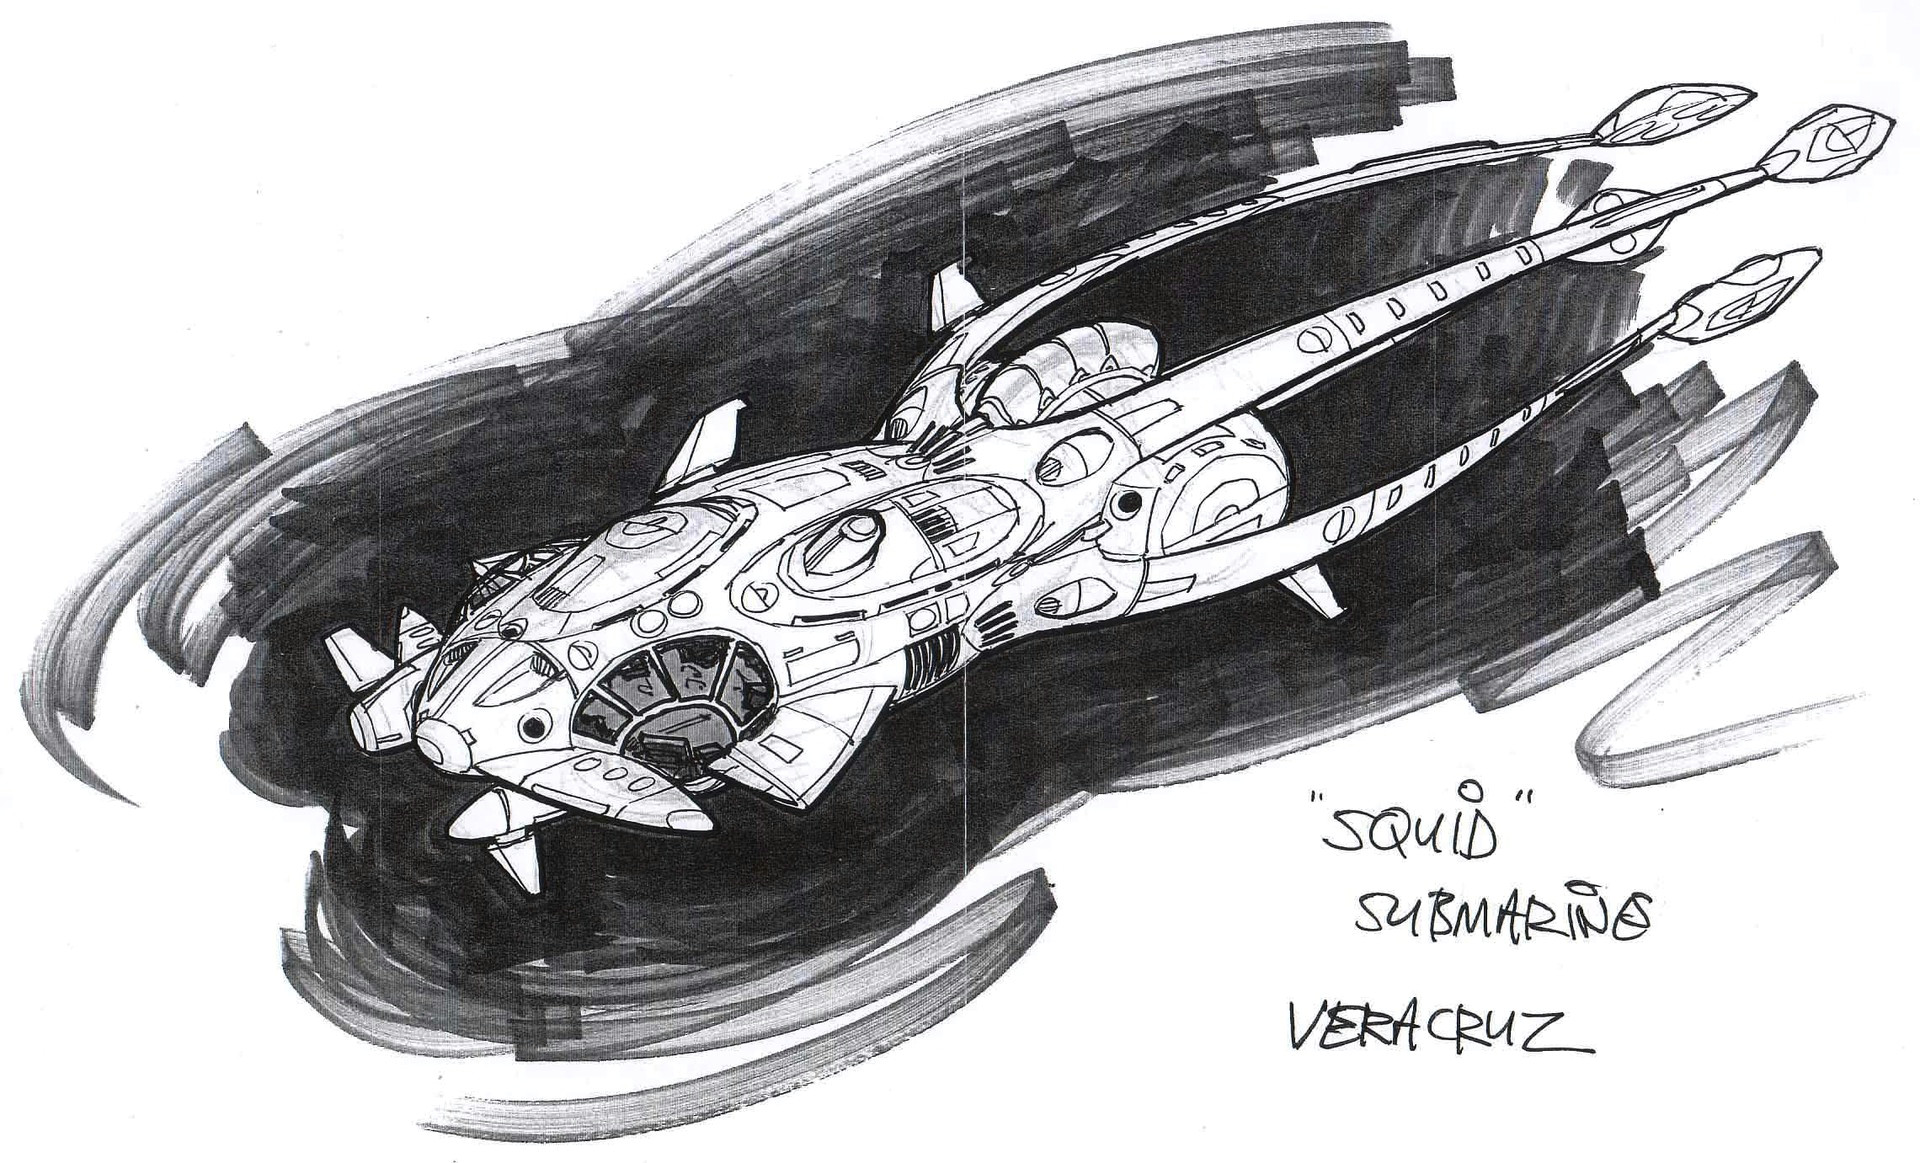 squidform scout submarine flying jeepney